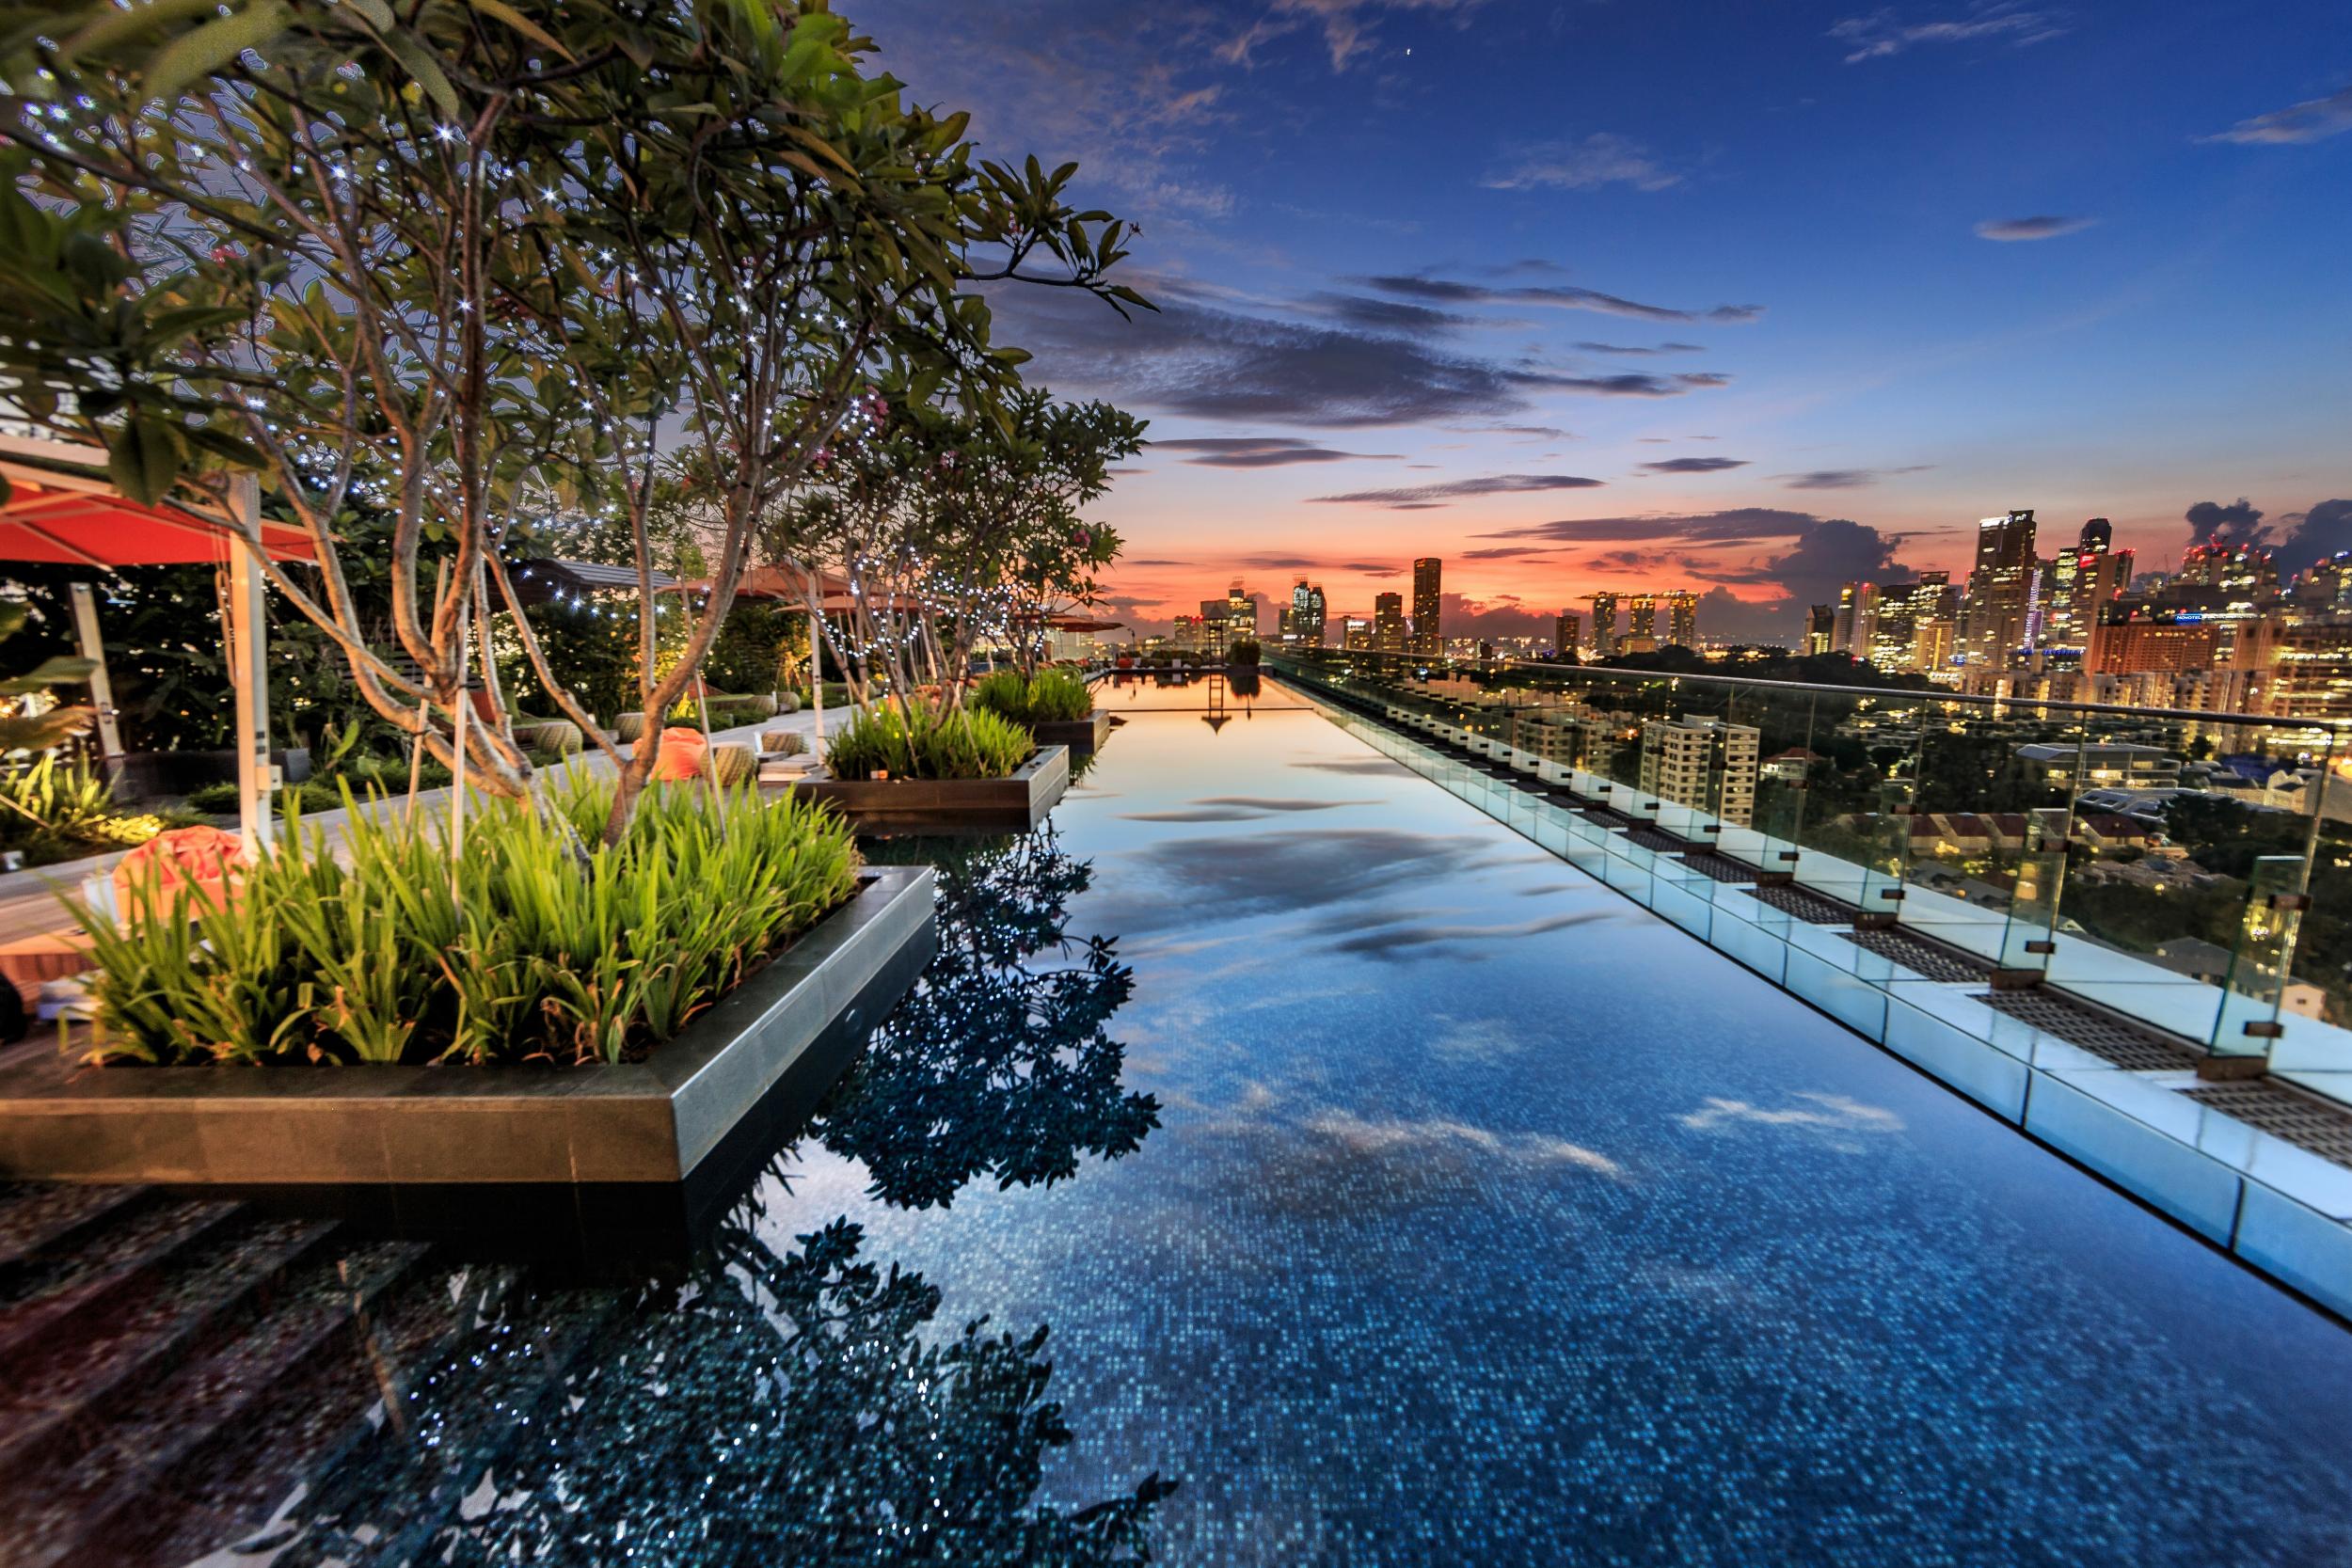 The rooftop pool at Hotel Jen offers superb city views